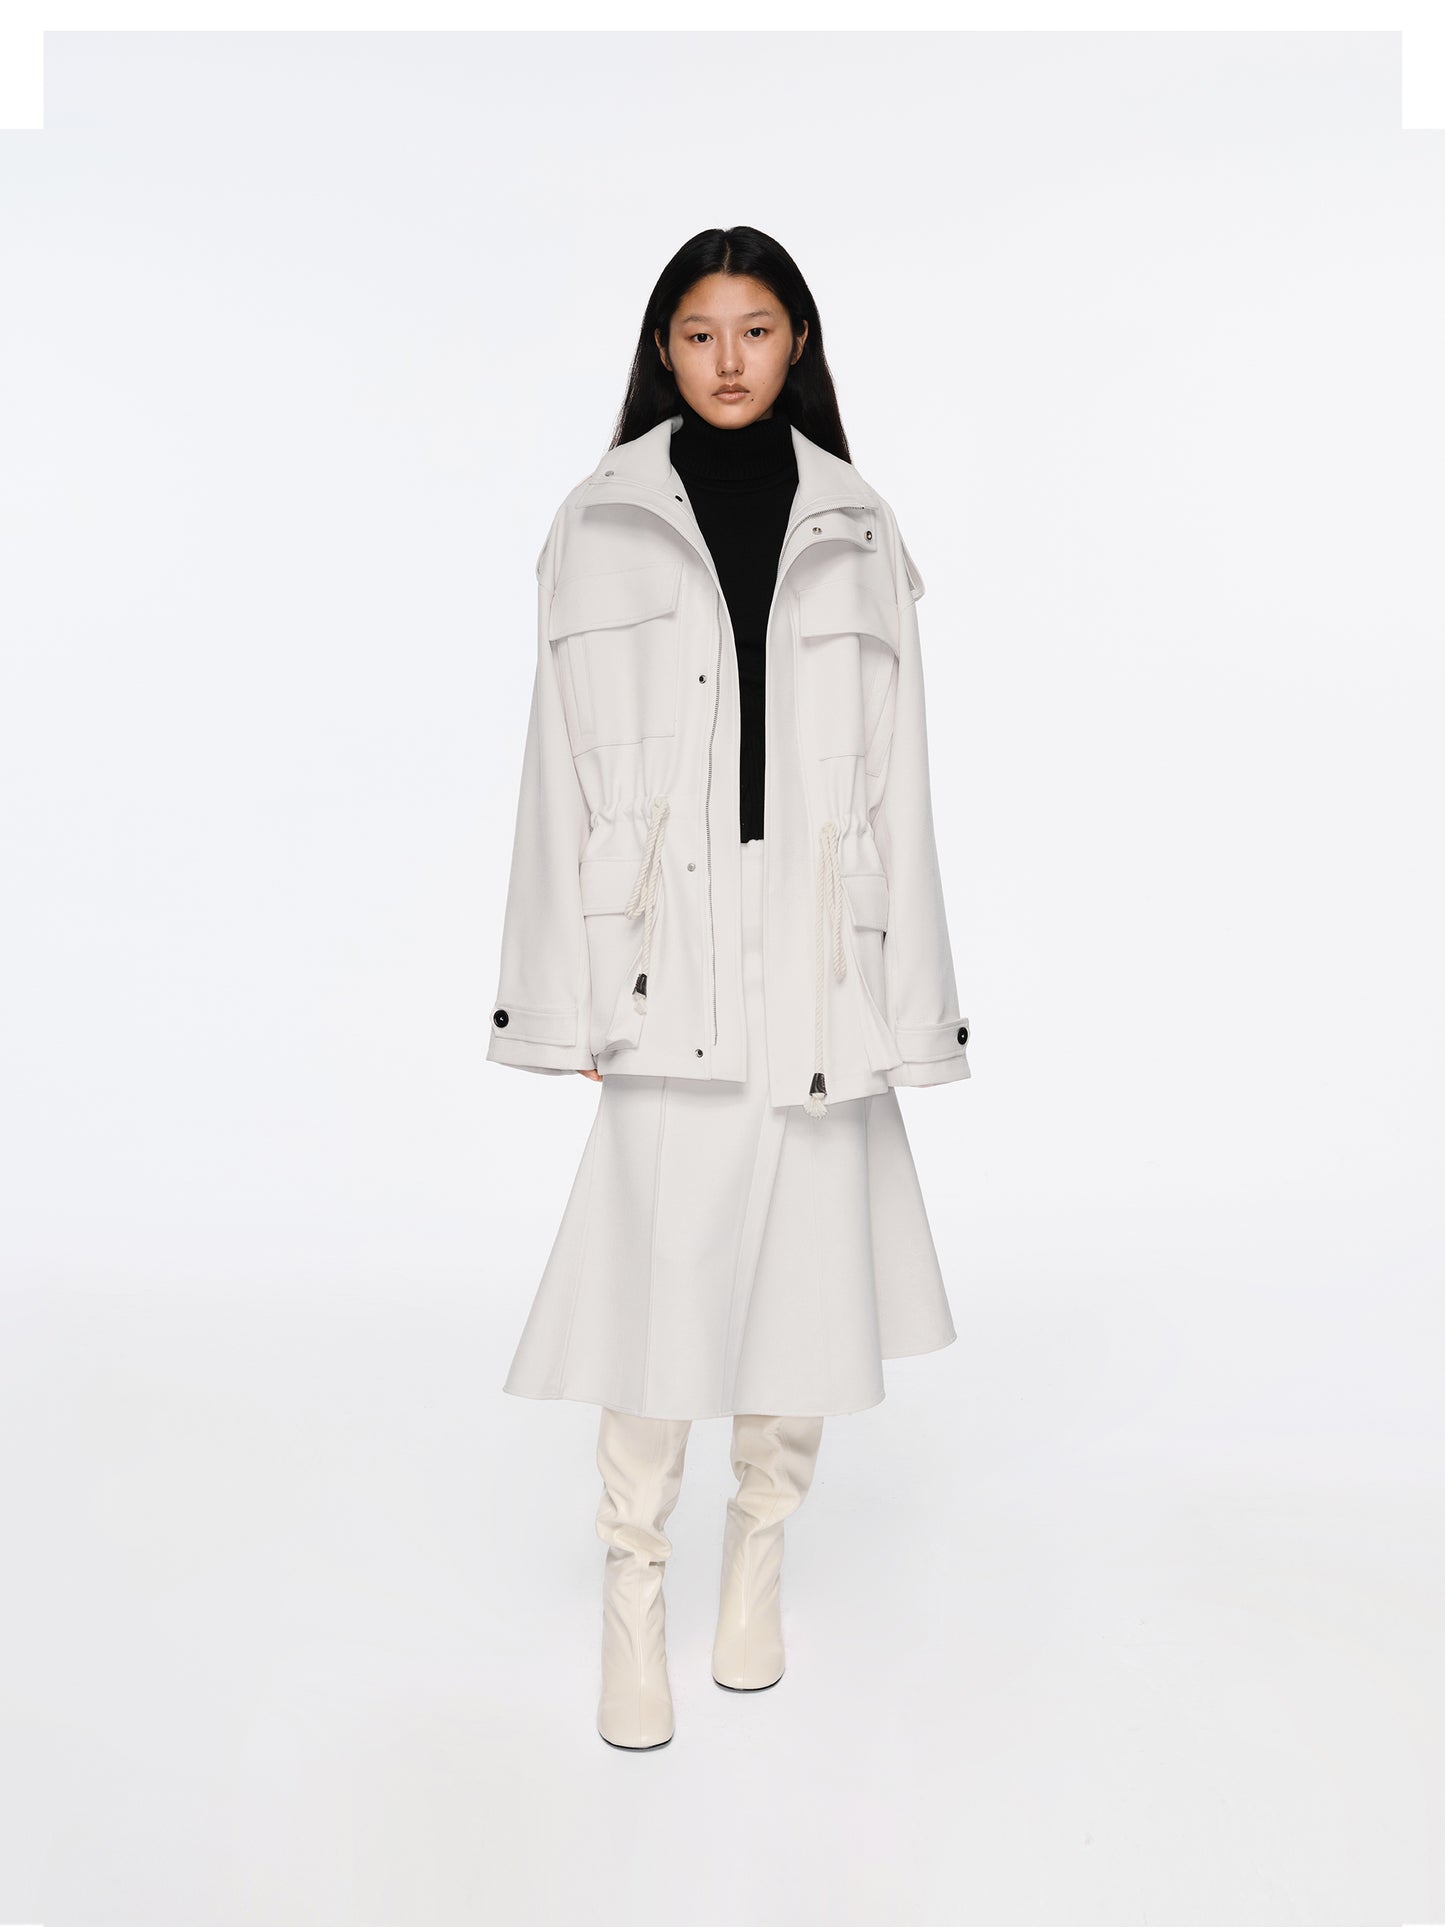 The Stand Collar Drawstring Parka